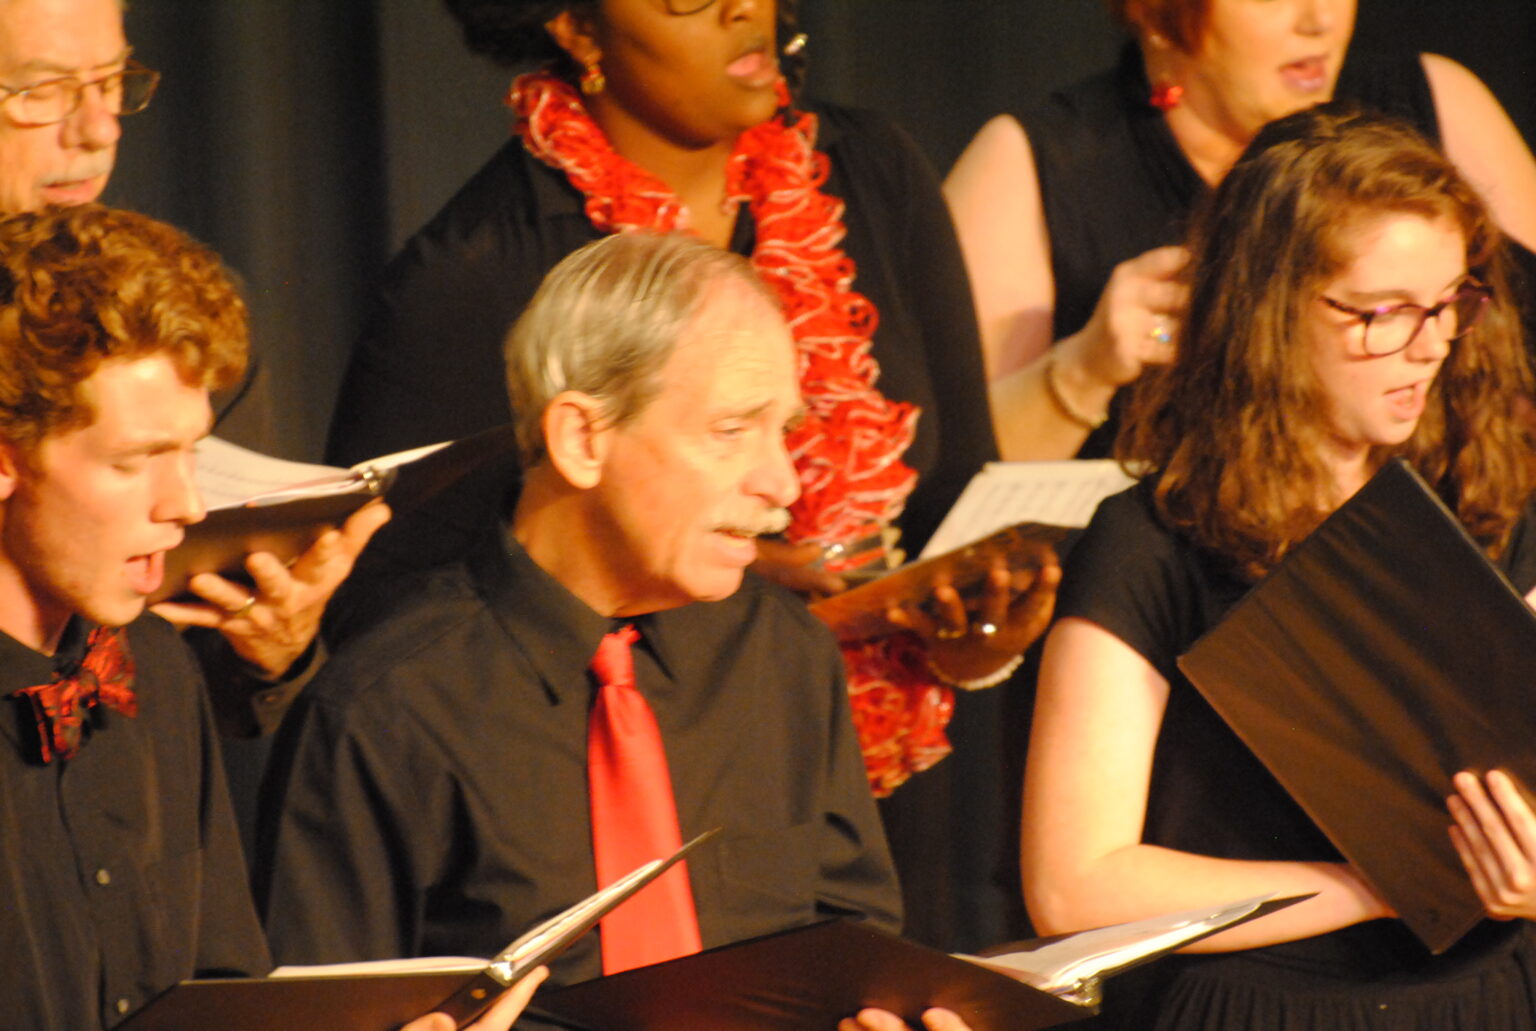 Close-up of a person singing in a choral group.